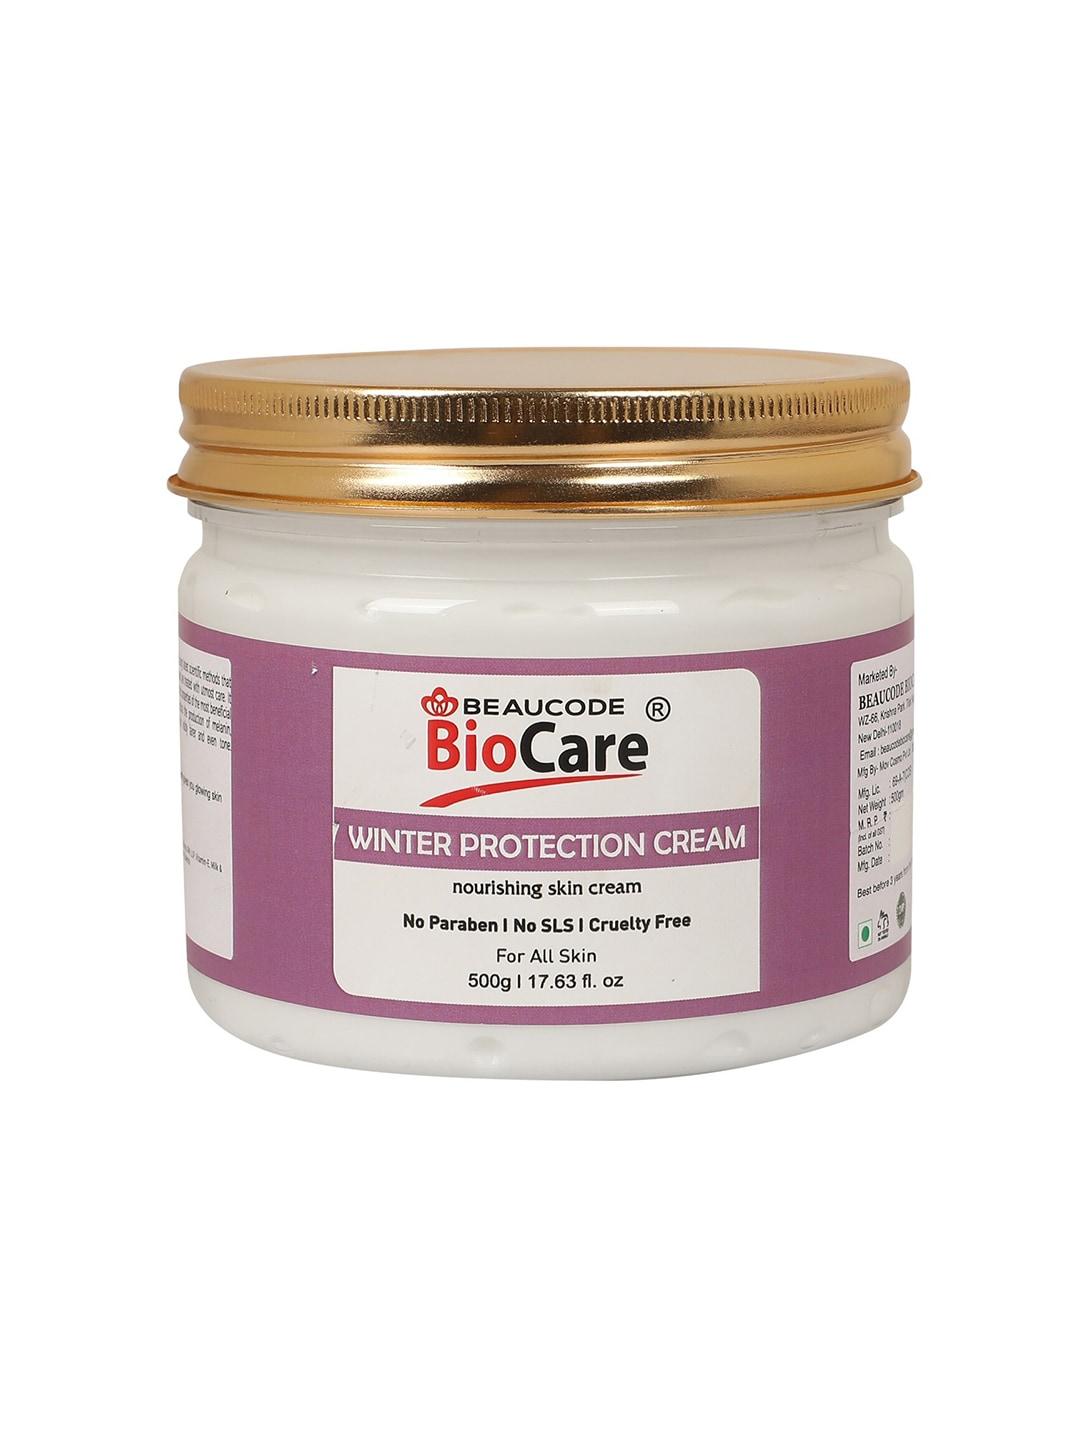 BEAUCODE BIOCARE Winter Protection Paraben Free Face & Body Cream - 500g